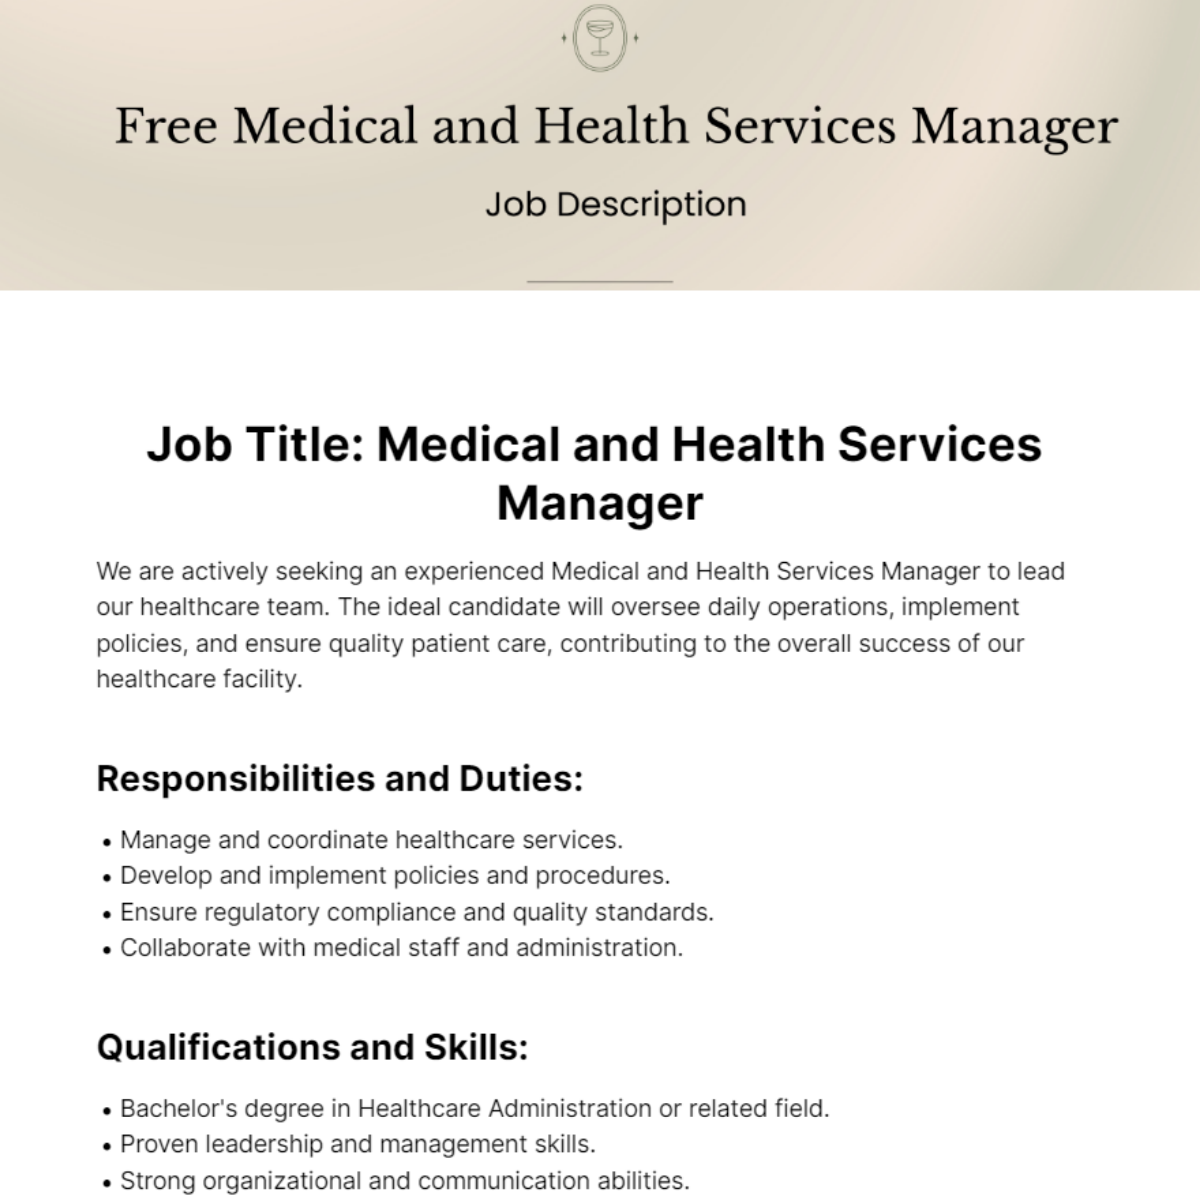 Medical and Health Services Manager Job Description Template